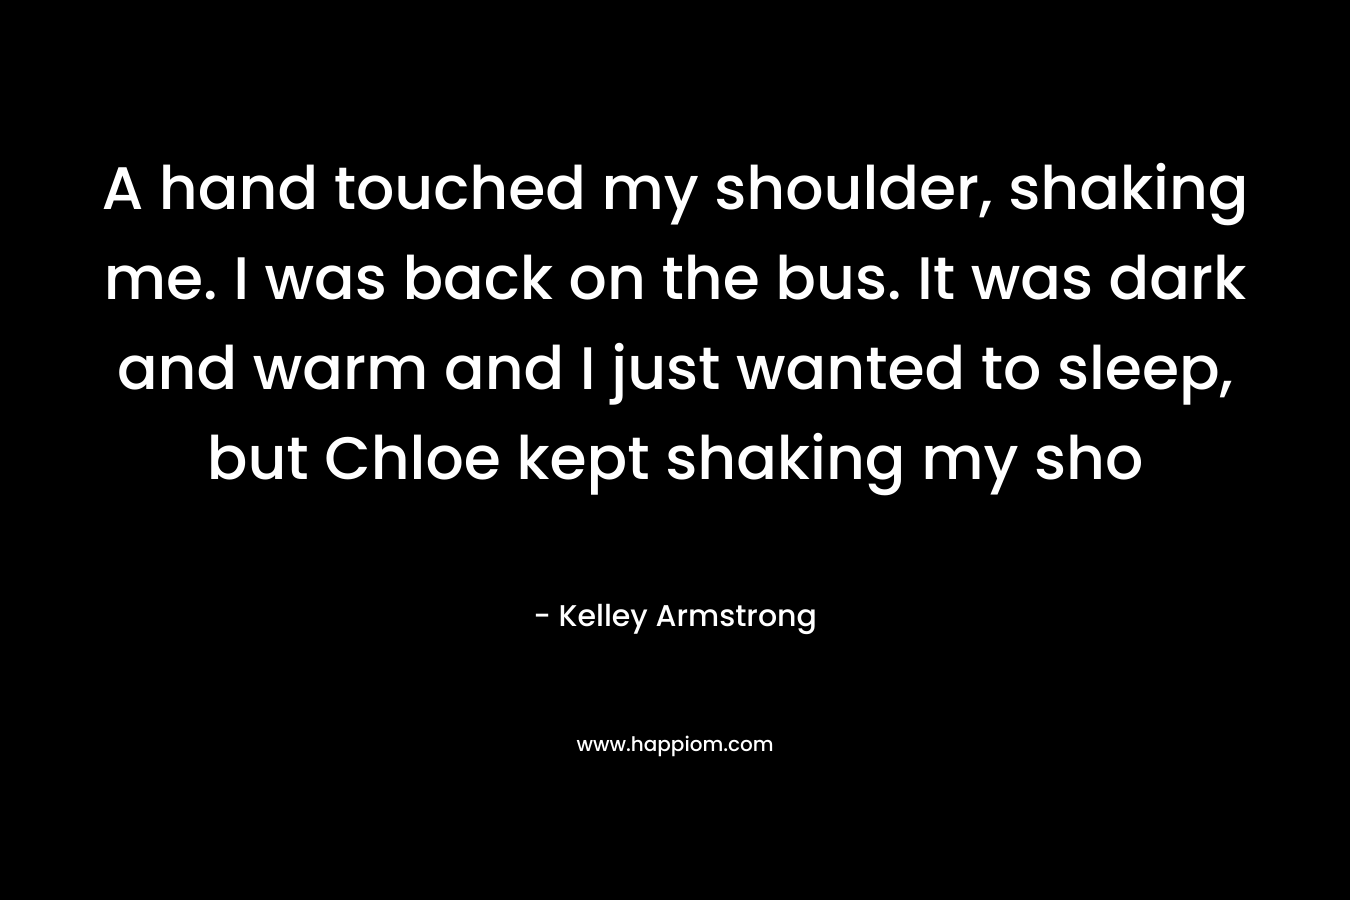 A hand touched my shoulder, shaking me. I was back on the bus. It was dark and warm and I just wanted to sleep, but Chloe kept shaking my sho